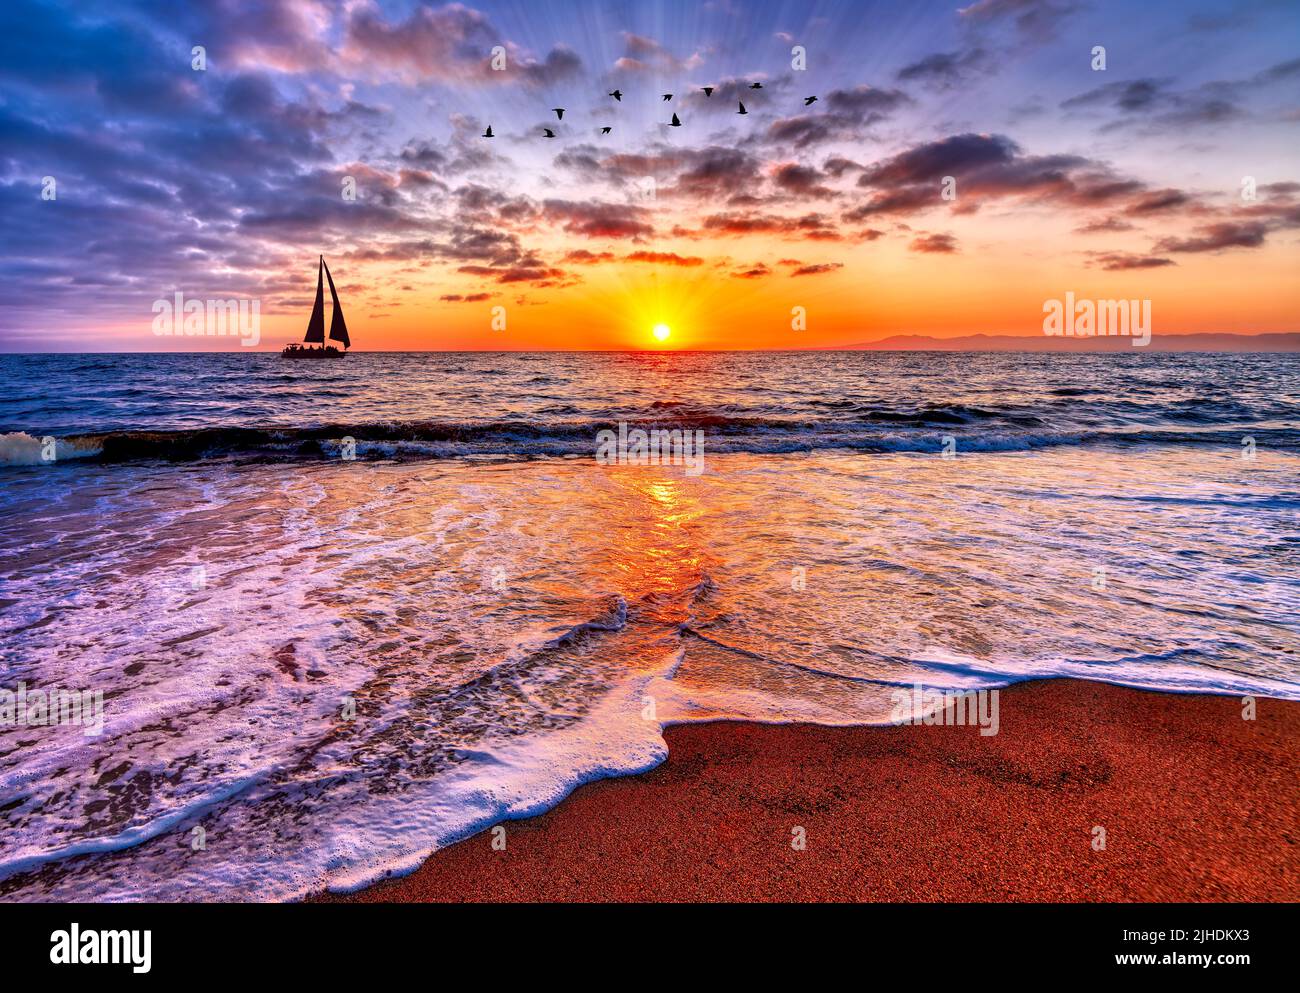 Sun Rays Are Bursting On The Ocean Horizon Sunrise With A Sailboat Sailing And Birds Flying Overhead Stock Photo